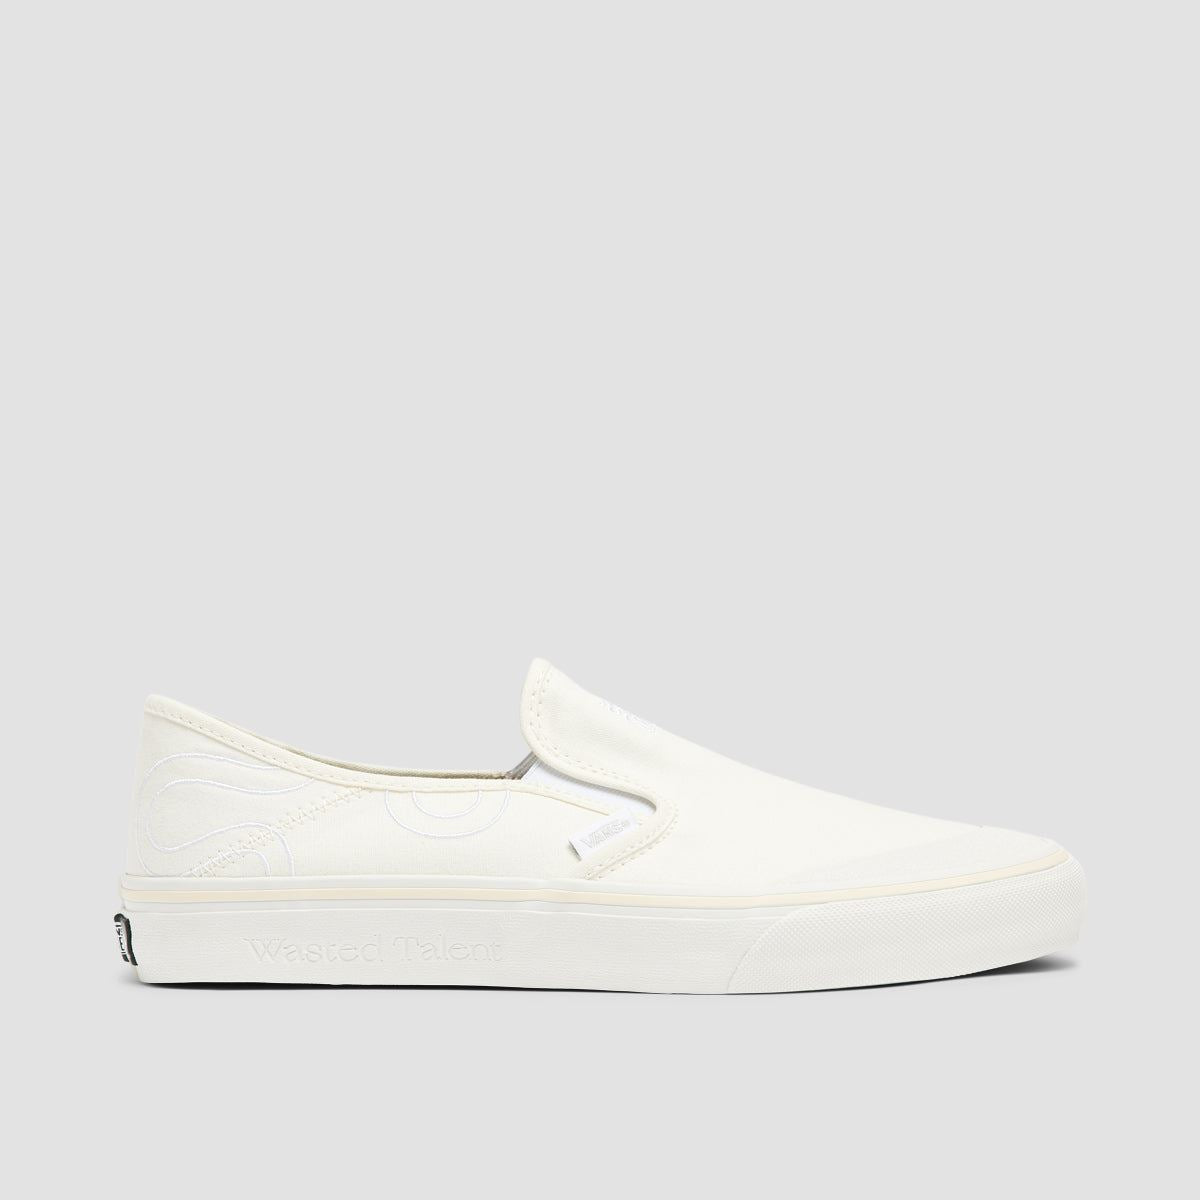 Vans X Wasted Talent VR3 SF Slip-On Shoes - Blanc De Blanc